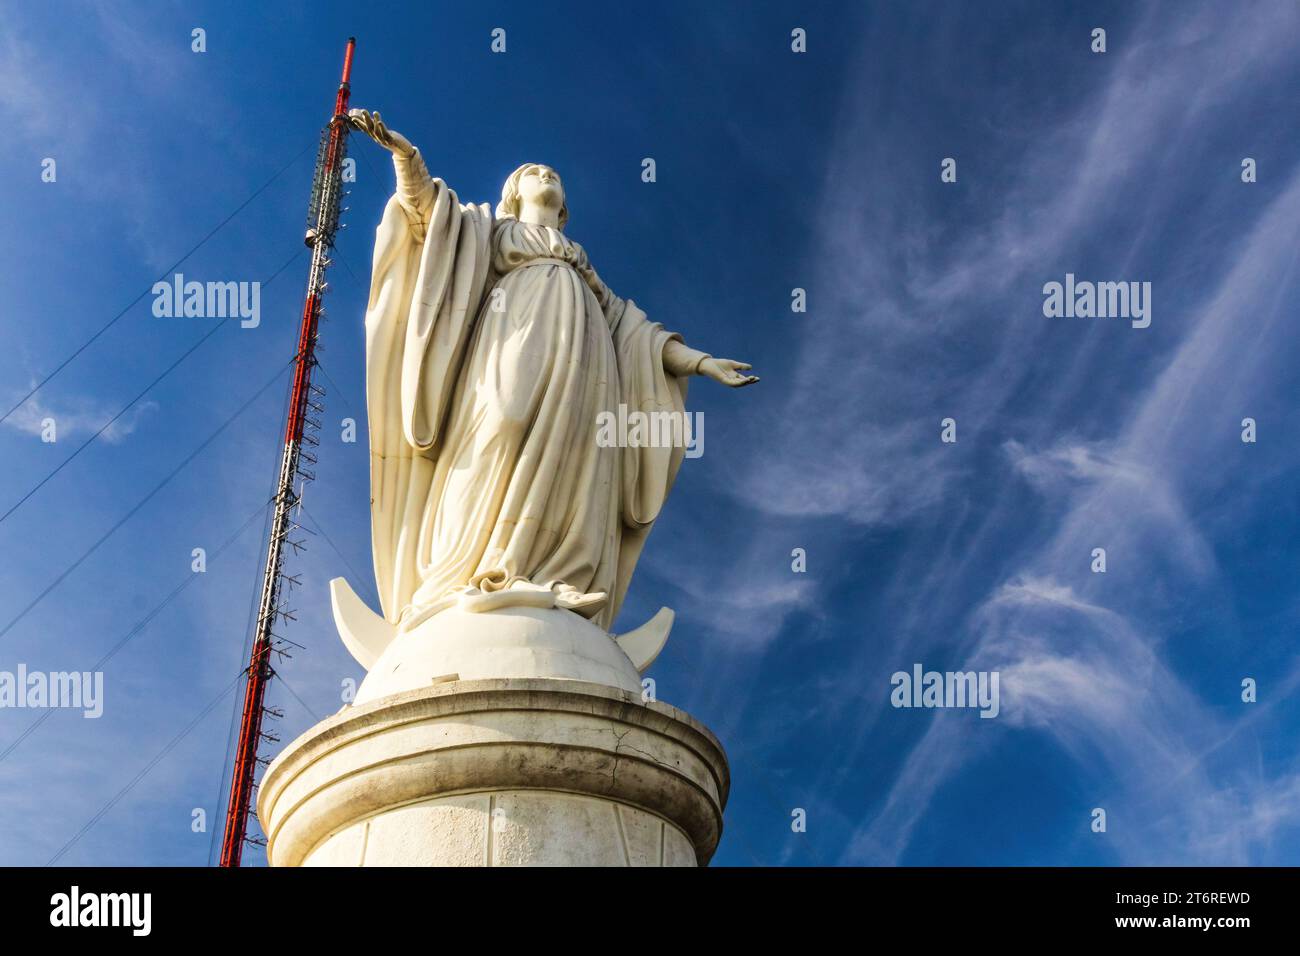 Statue of the Virgin Mary looking up to the sky, on top of Cerro San Cristóbal that overlooks the city of Santiago, Chile. Stock Photo